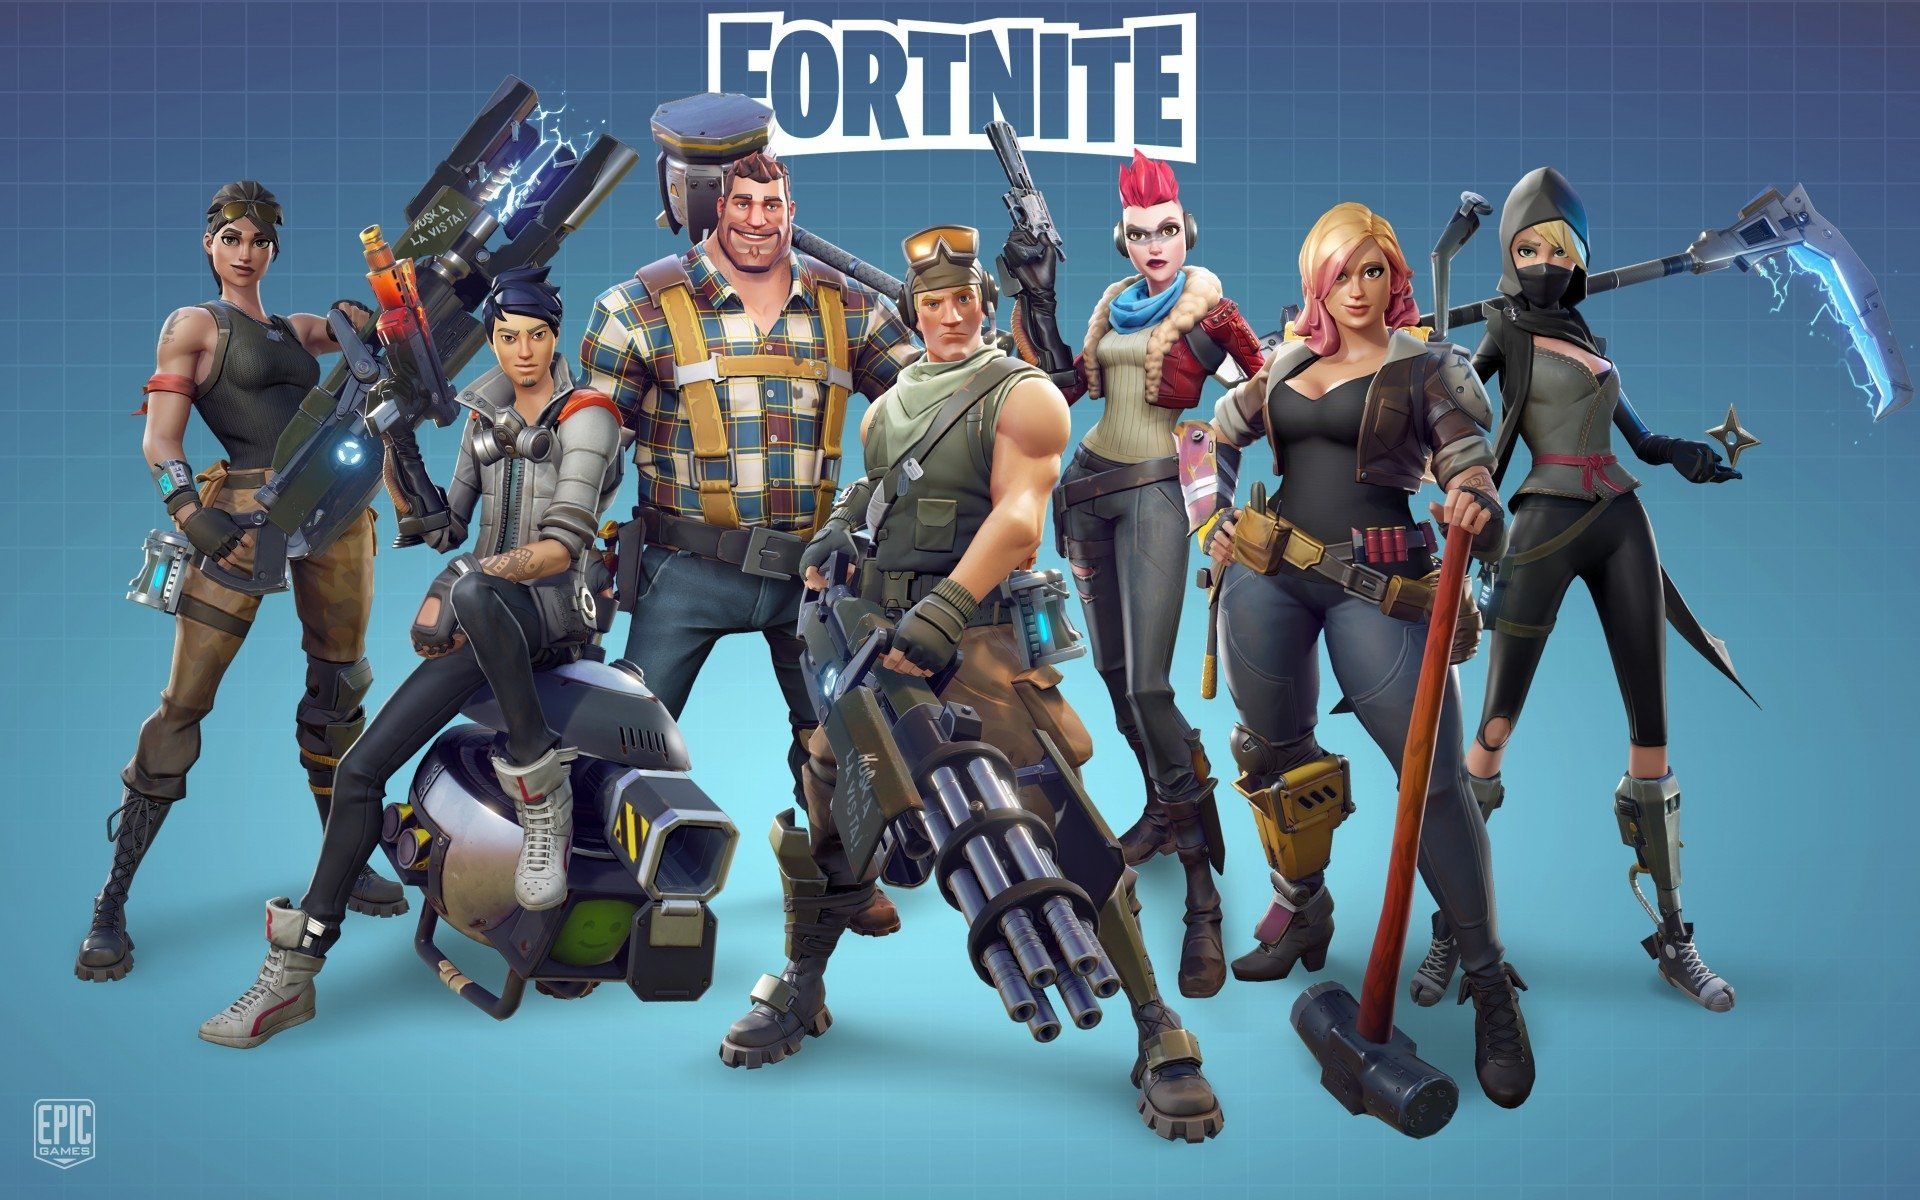 Fortnite Wallpapers Wallpaper Cave We have got the new vi fortnite monthly crew pack with a new fortnite drift skin, this crew monthly pack is the fortnite february monthly crew pack. fortnite wallpapers wallpaper cave